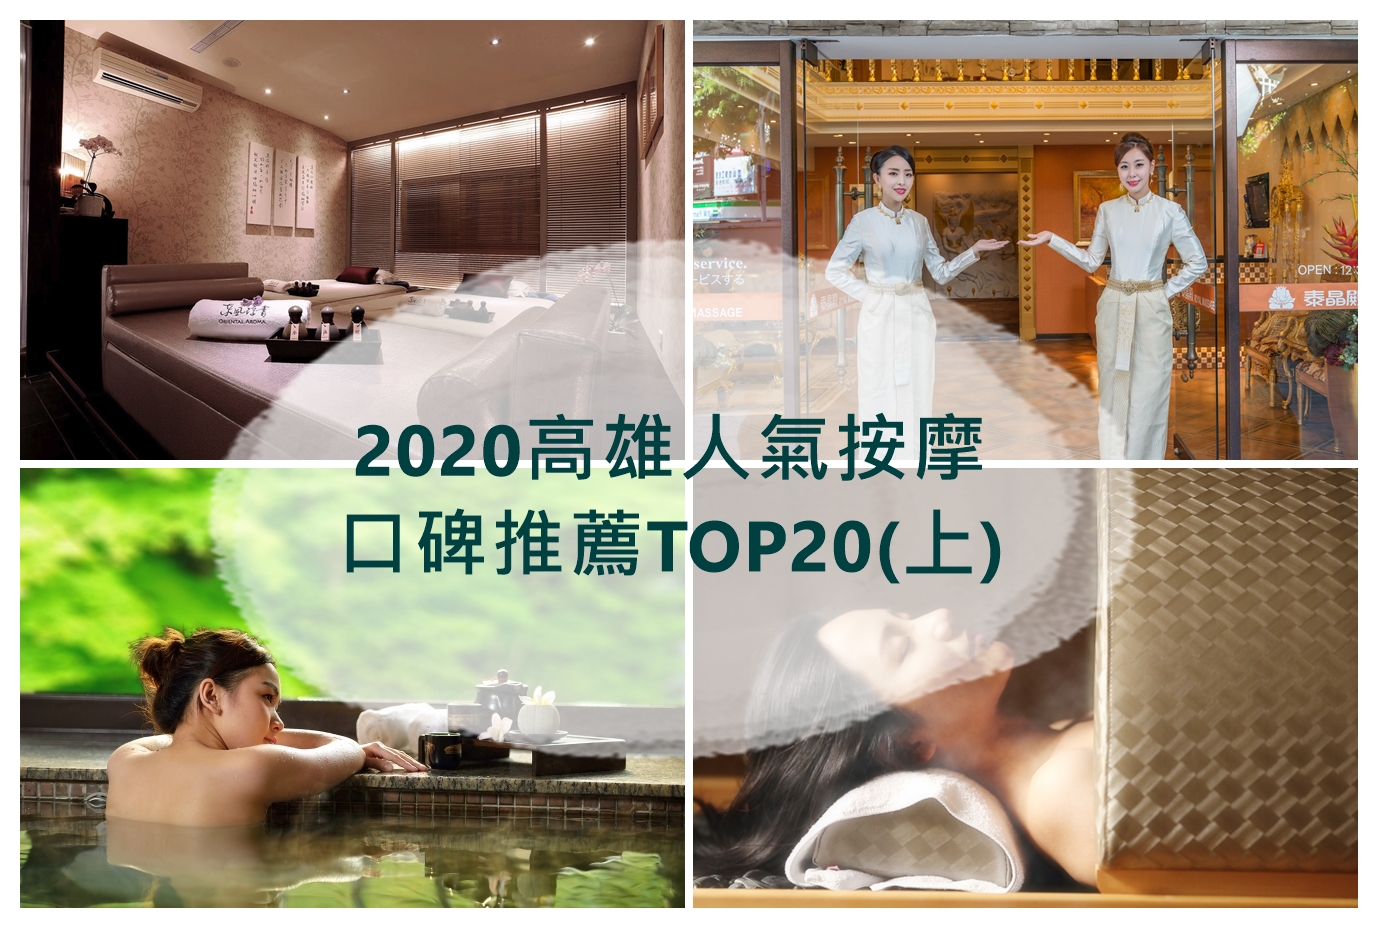 Relax33SPA: Truly Awesome Massage Therapy in Taipei @東南亞投資報告